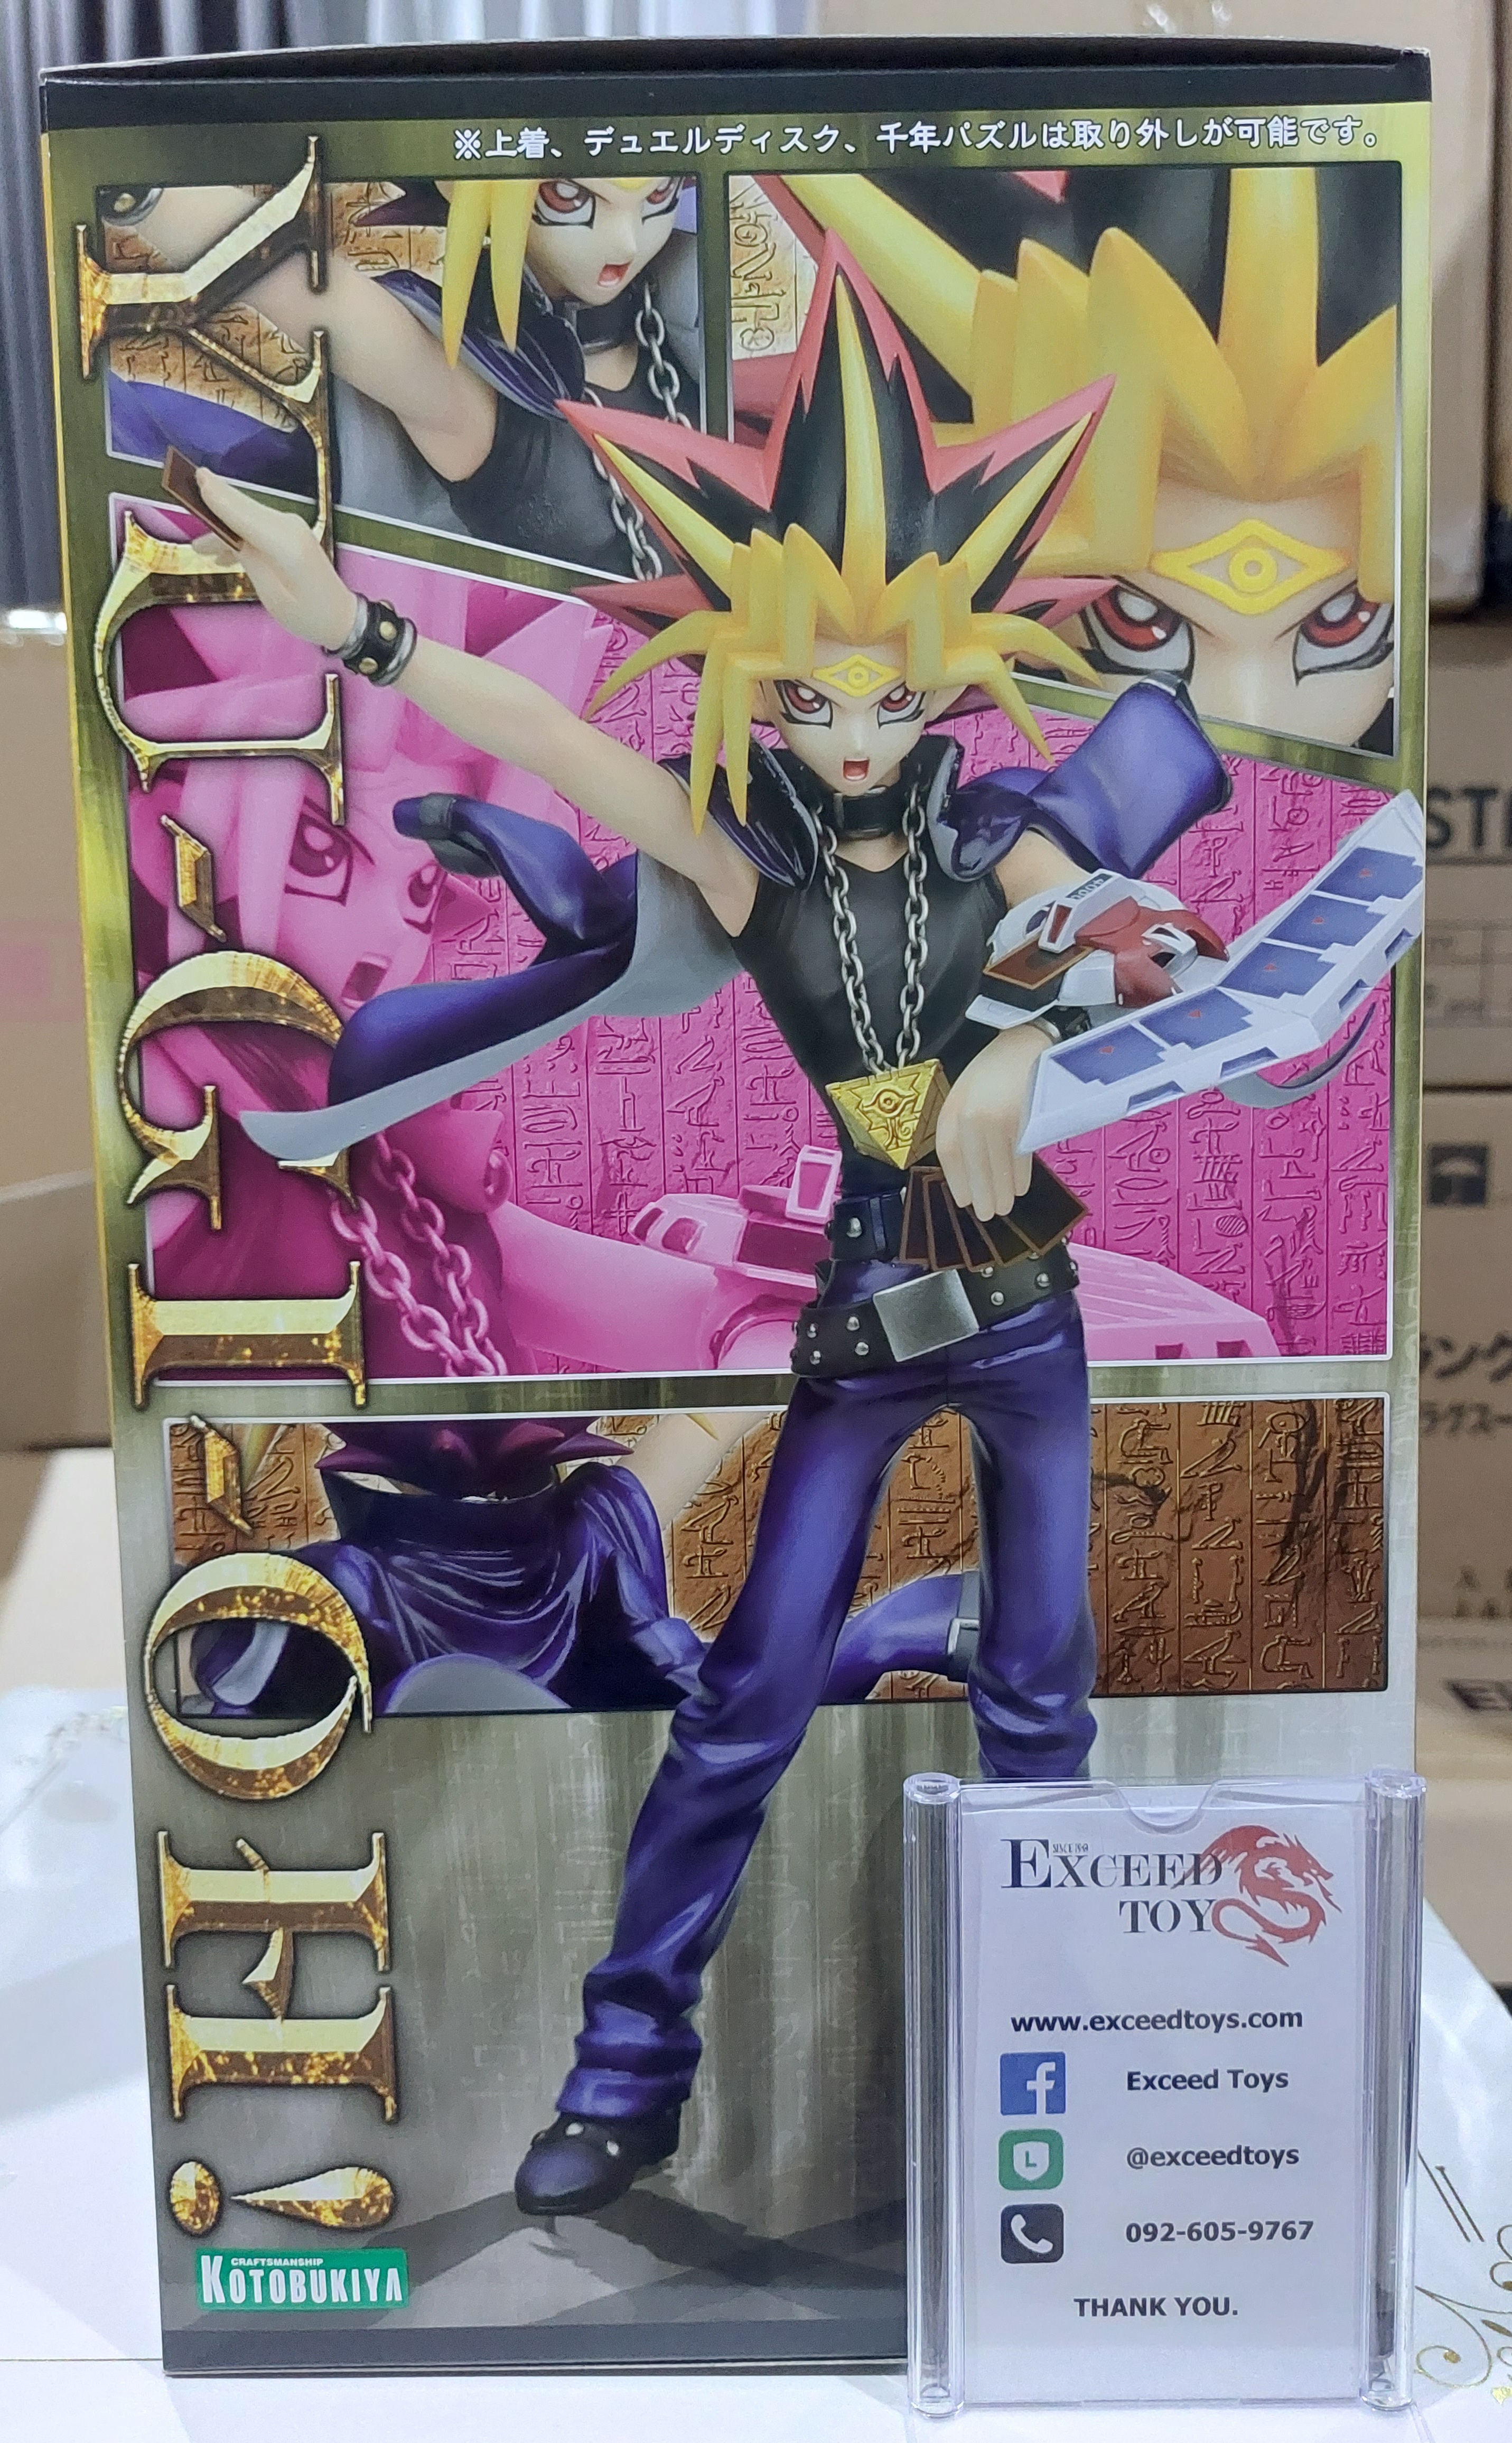 Yami Yugi Duel with Destiny ARTFX J - Exceed Toys : Inspired by